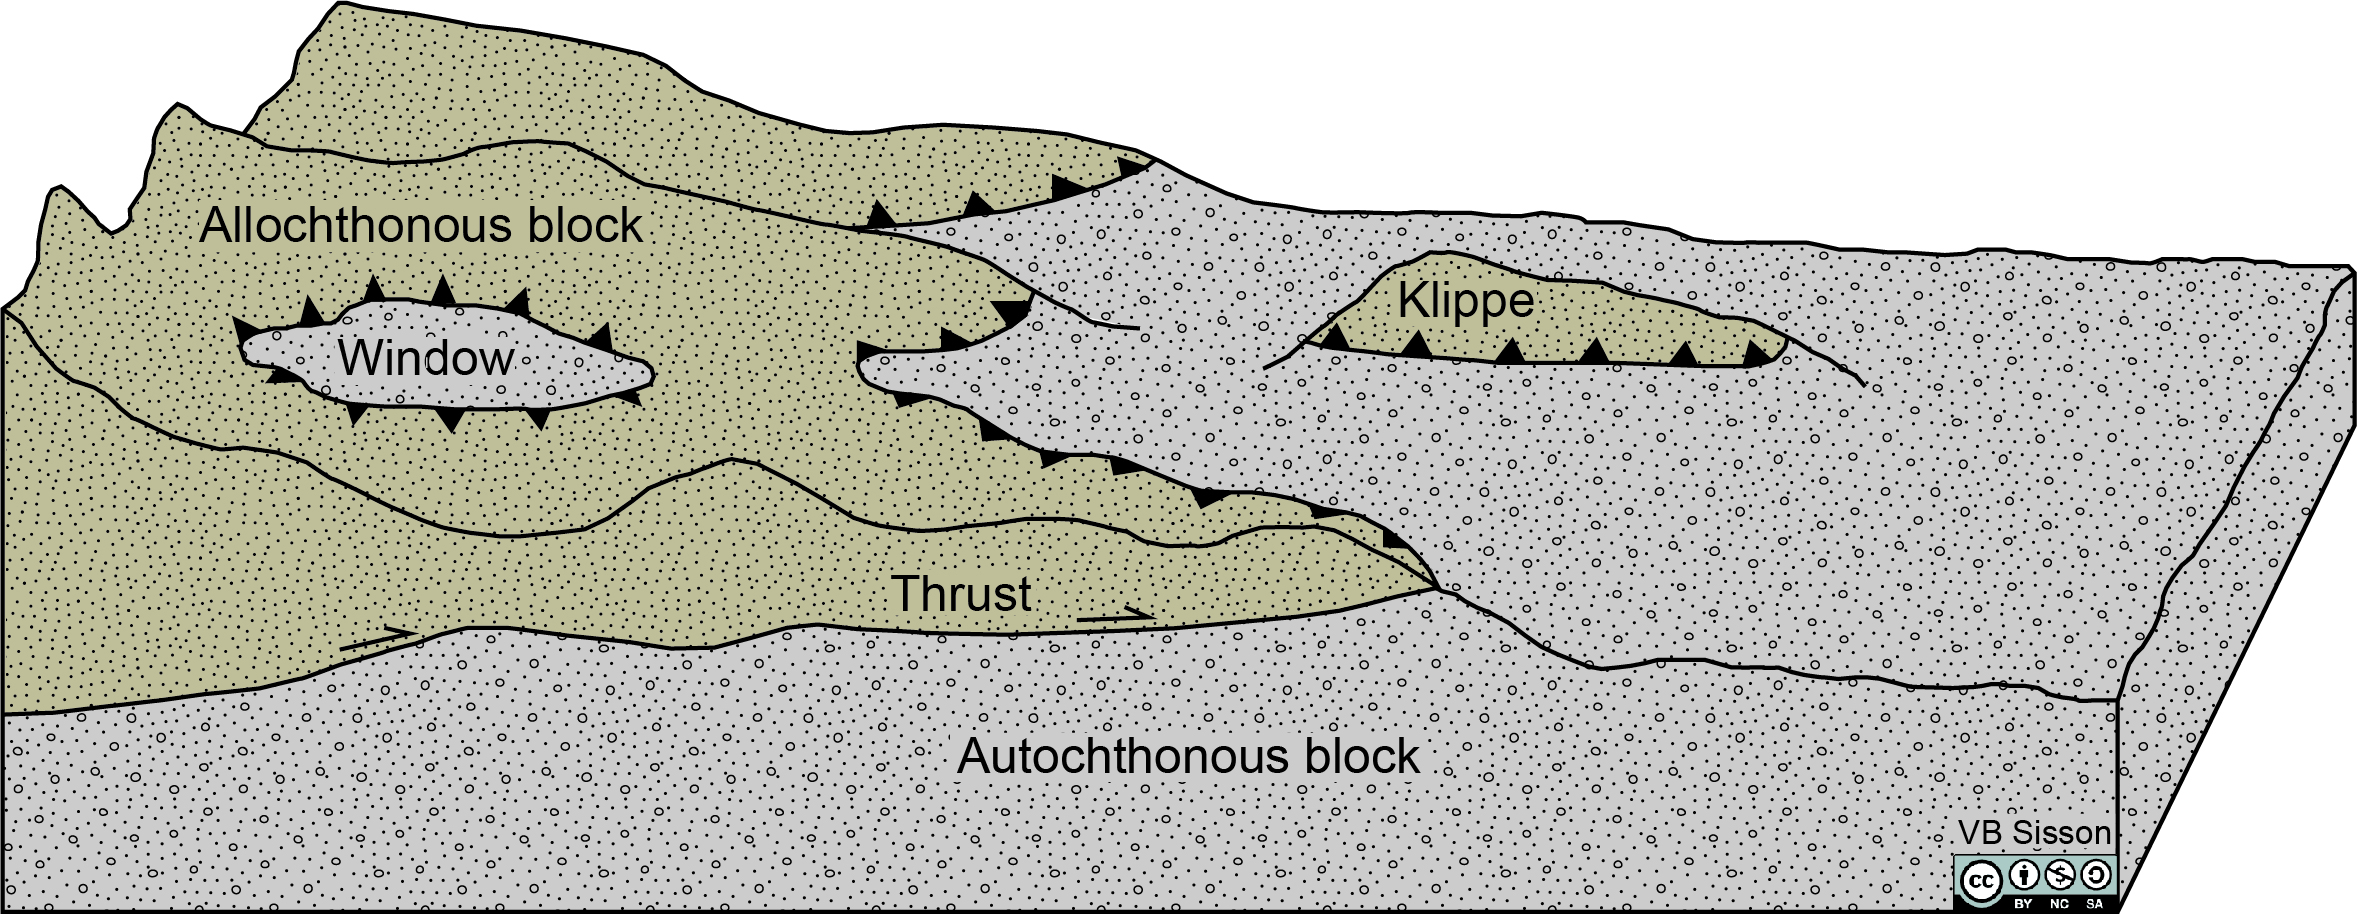 Thrust fault forming a klippe or window